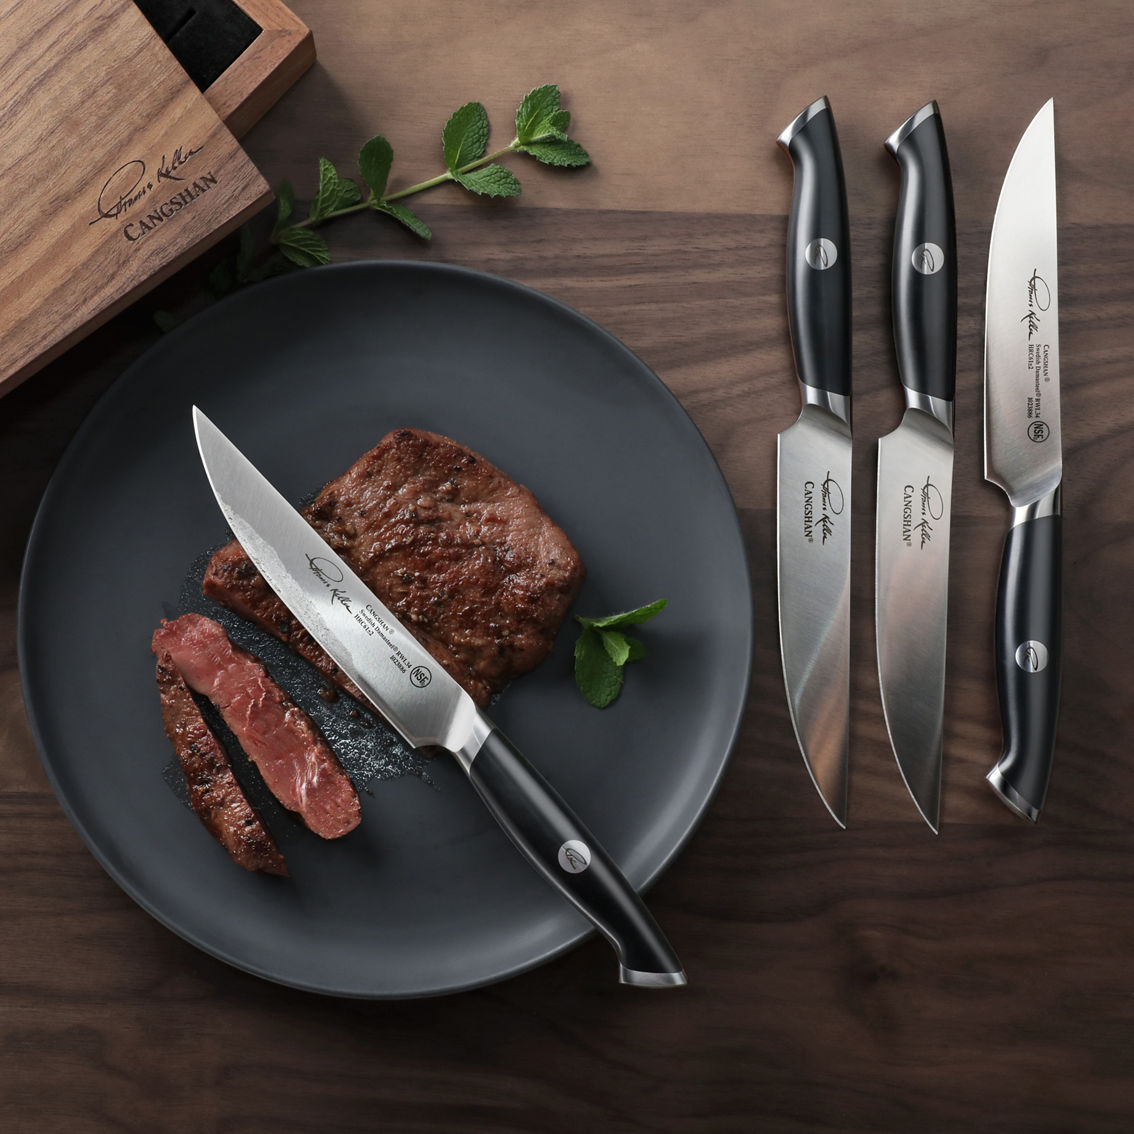 Cangshan Thomas Keller Signature Collection knife set review - Reviewed